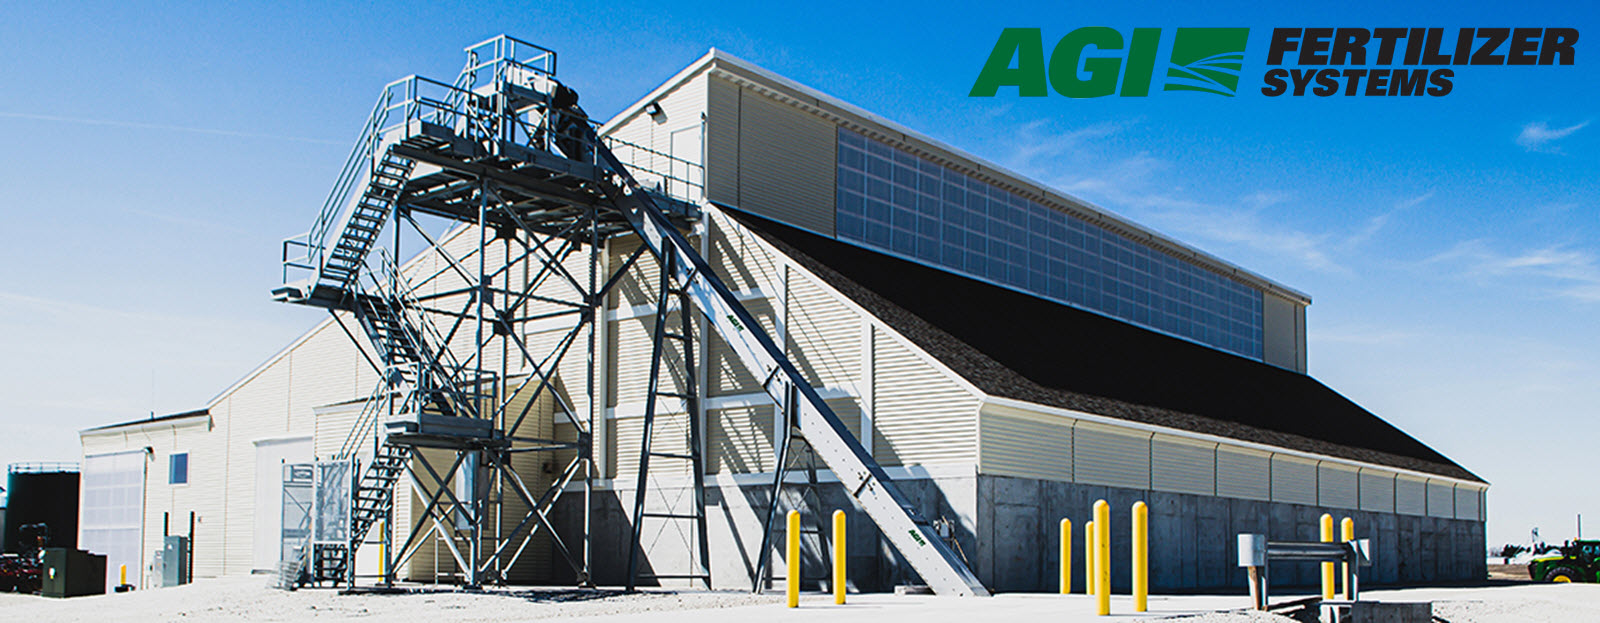 Banner forAGI Fertilizer Systems, Over 50 Years of Excellence in Fertilizer Handling